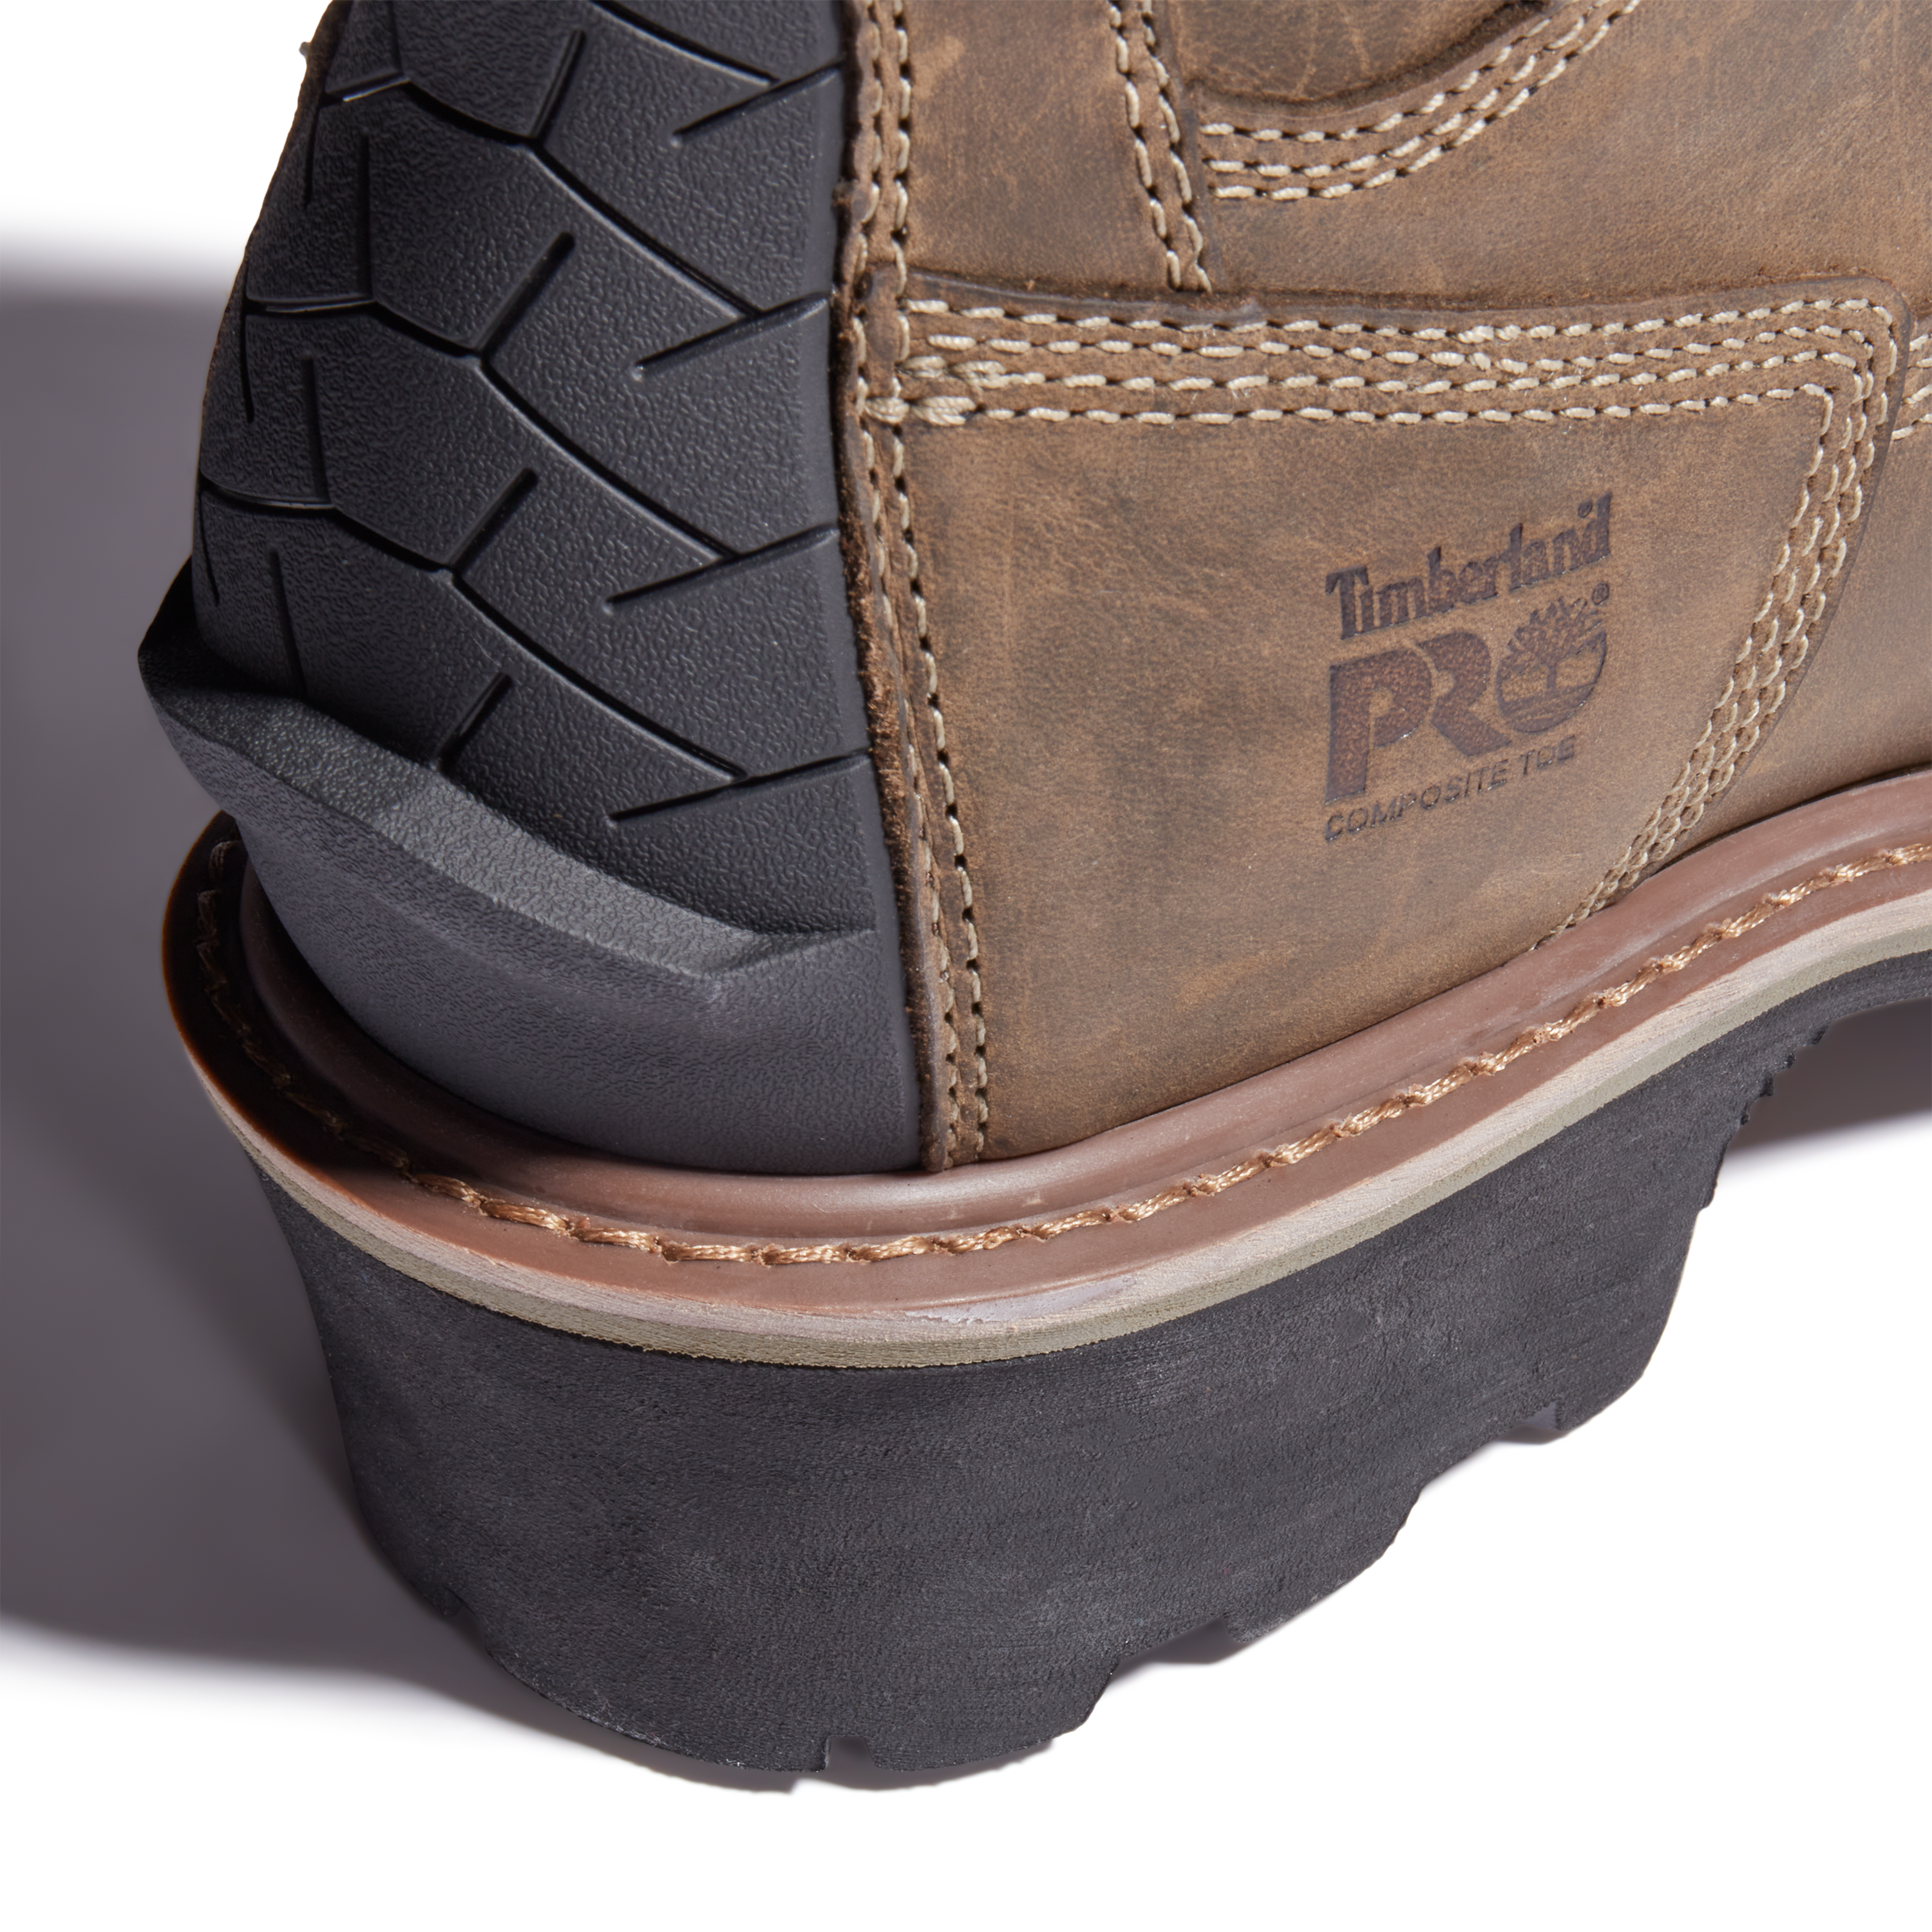 Timberland Pro Evergreen Logger Composite Toe Insulated / Waterproof - Wide - Mens